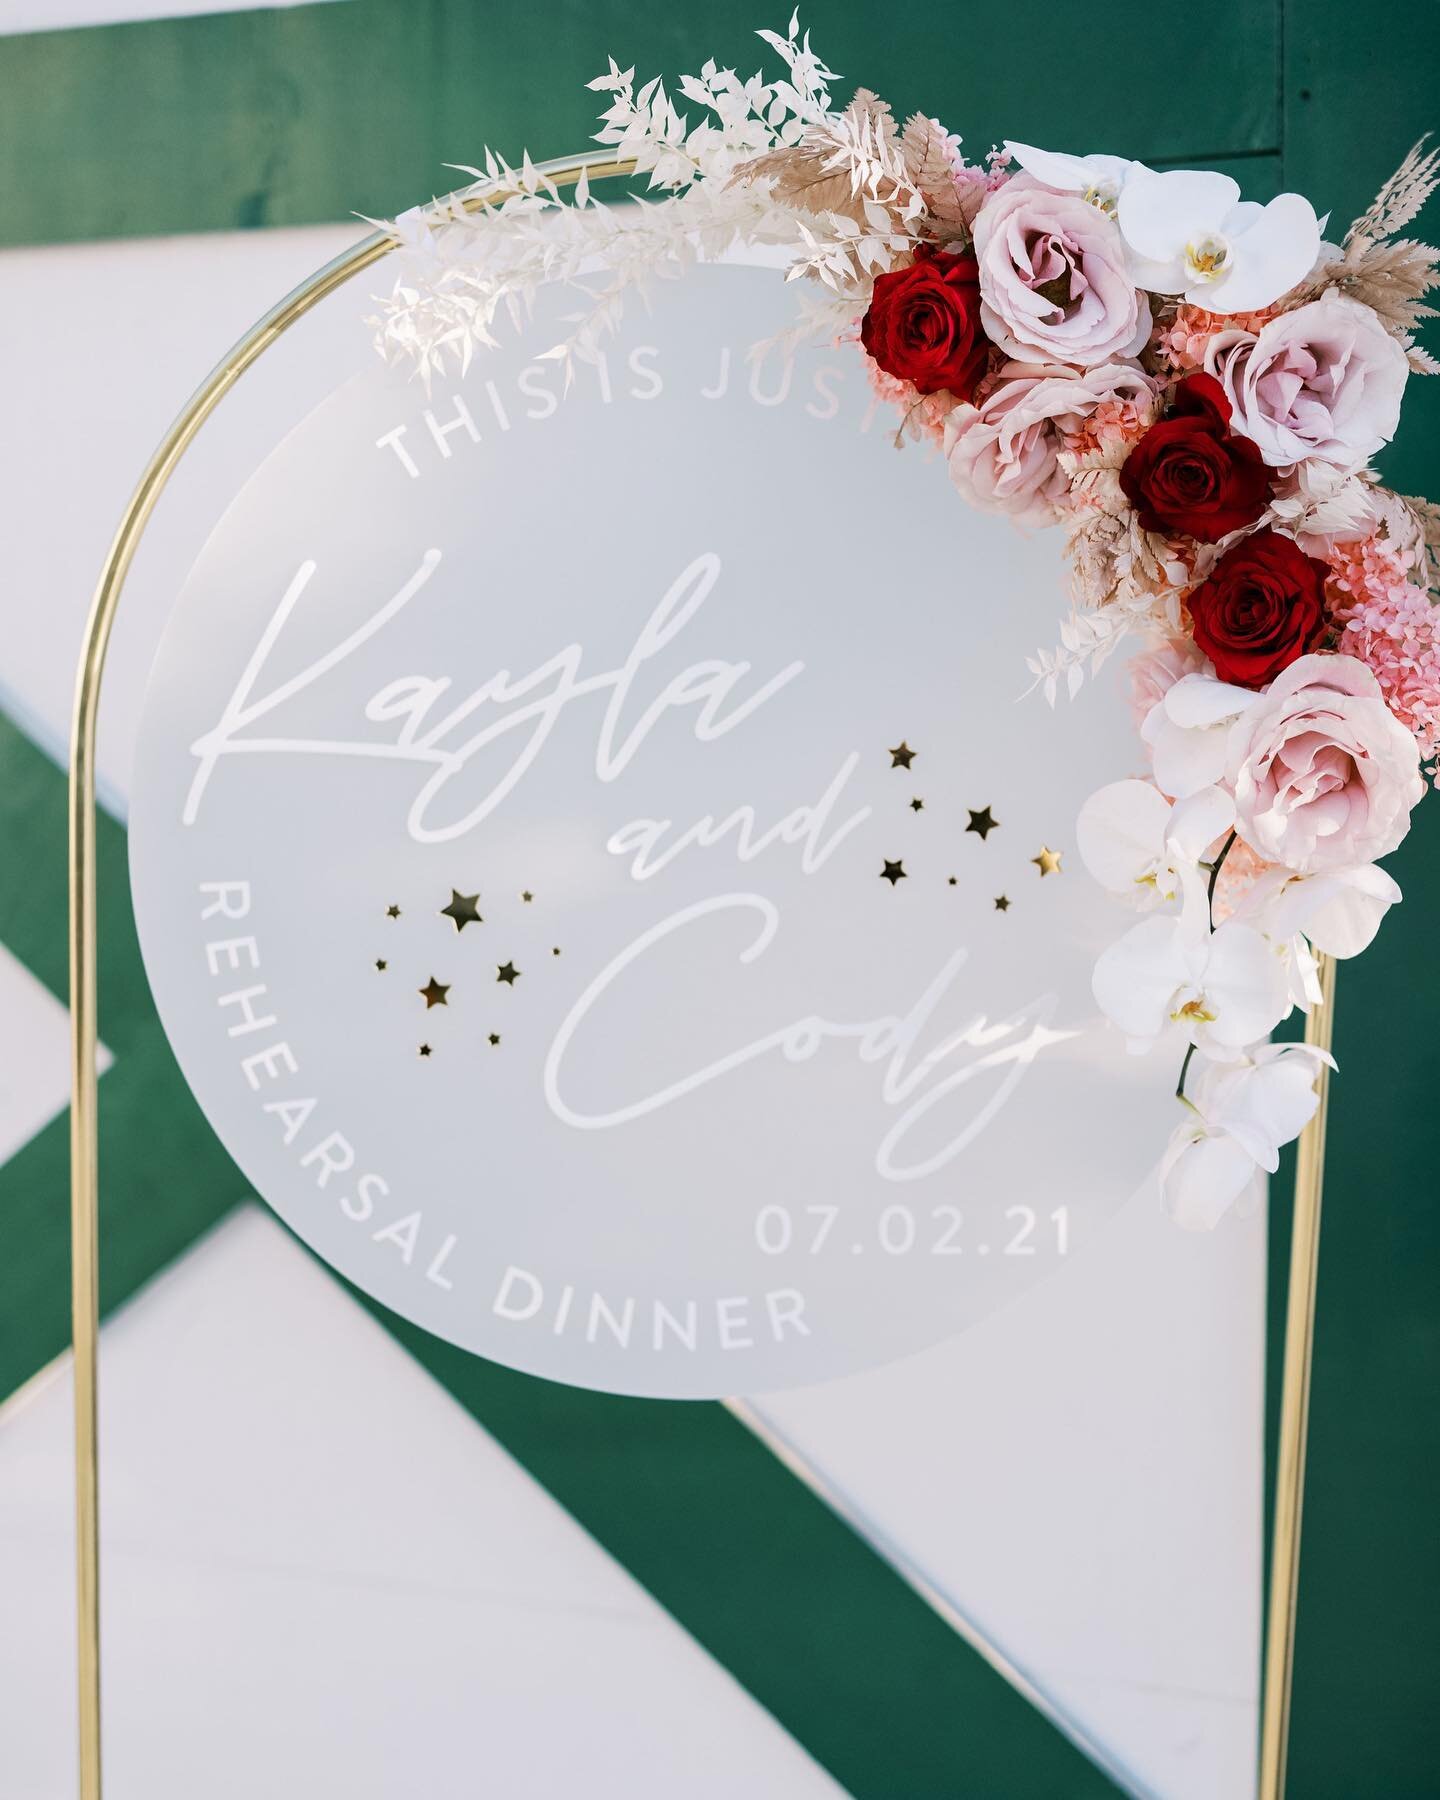 Gold mirror and frosted acrylic signage details for K+C&rsquo;s epic rehearsal dinner! ✨
Photographer @kelseaholderphoto 
Design + Signage @lovelyfest 
Florals @idlewildfloral 
Catering @fieldtotableevents 
Rentals @theonicollection @avenuetwelve @al